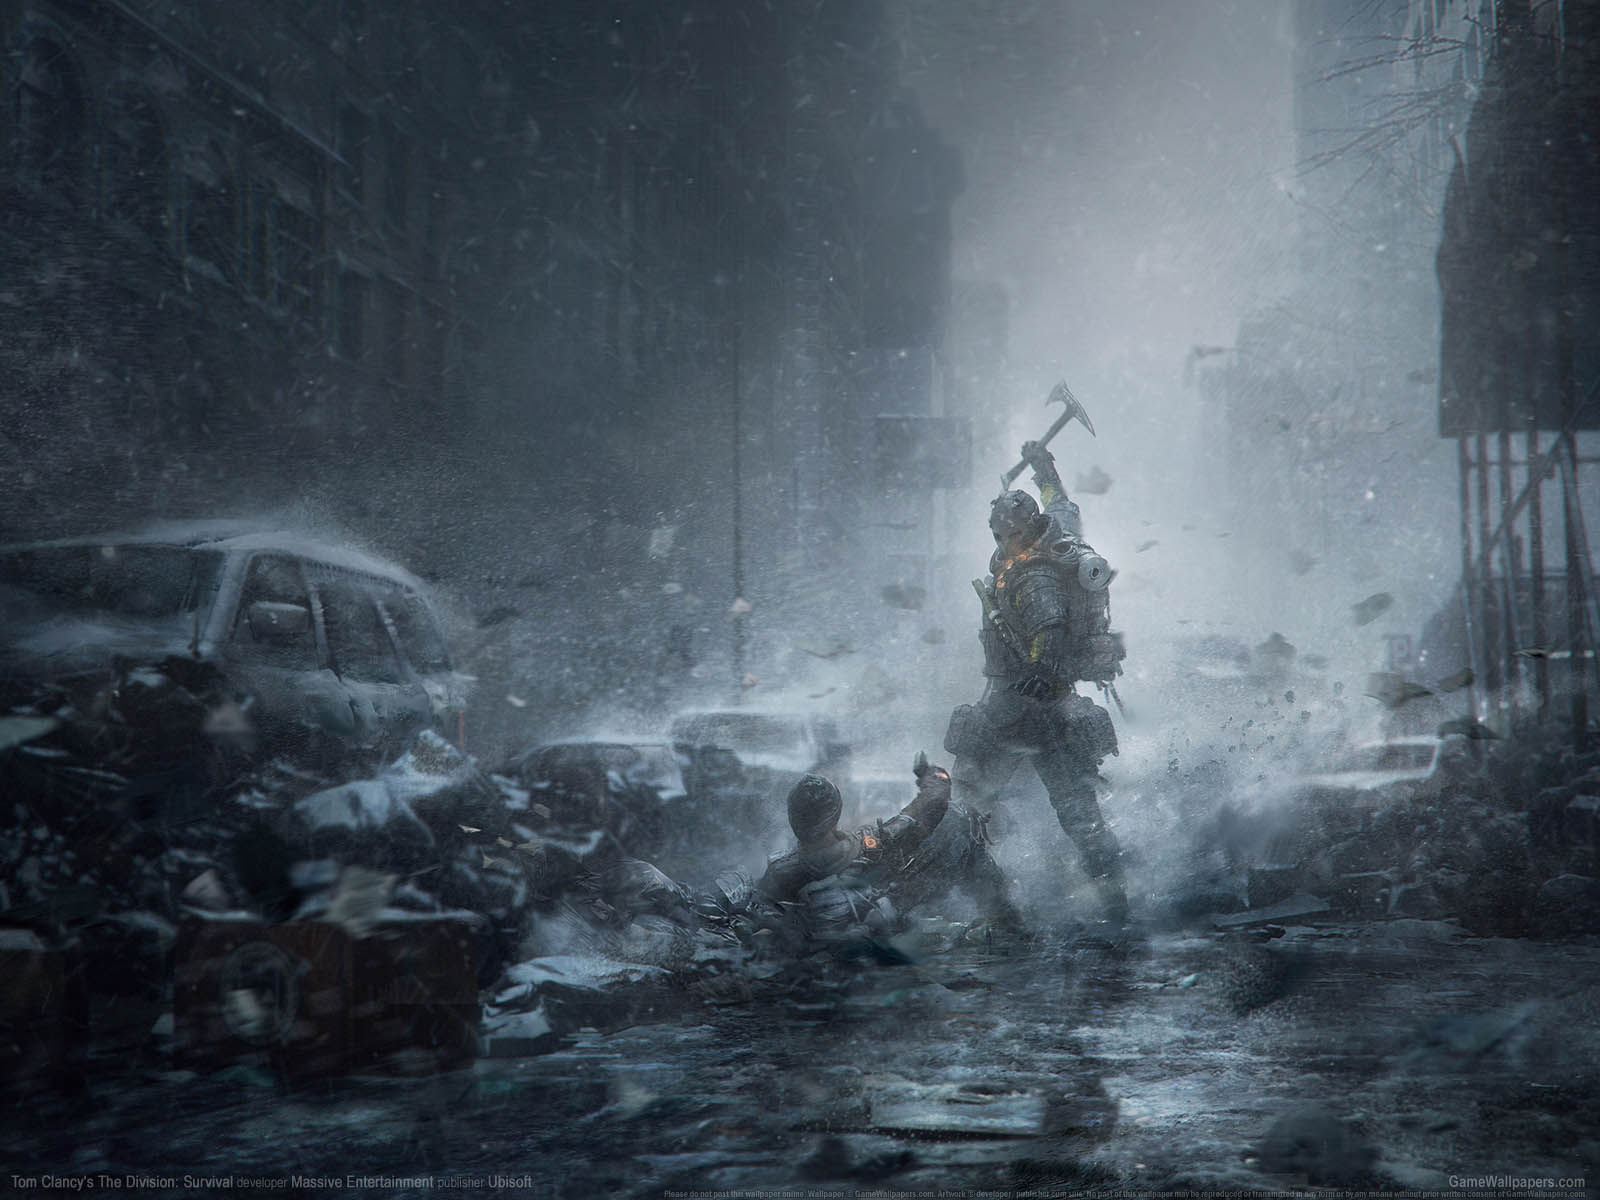 Tom Clancy's The Division: Survivalνmmer=02 achtergrond  1600x1200